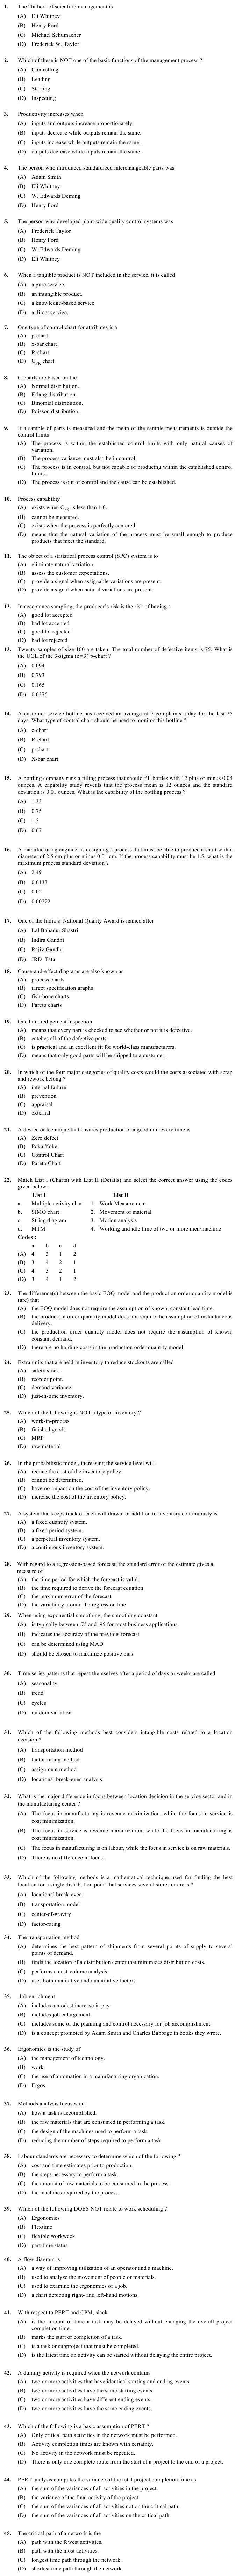 OJEE 2013 Question Paper for PGAT Industrial Eng.